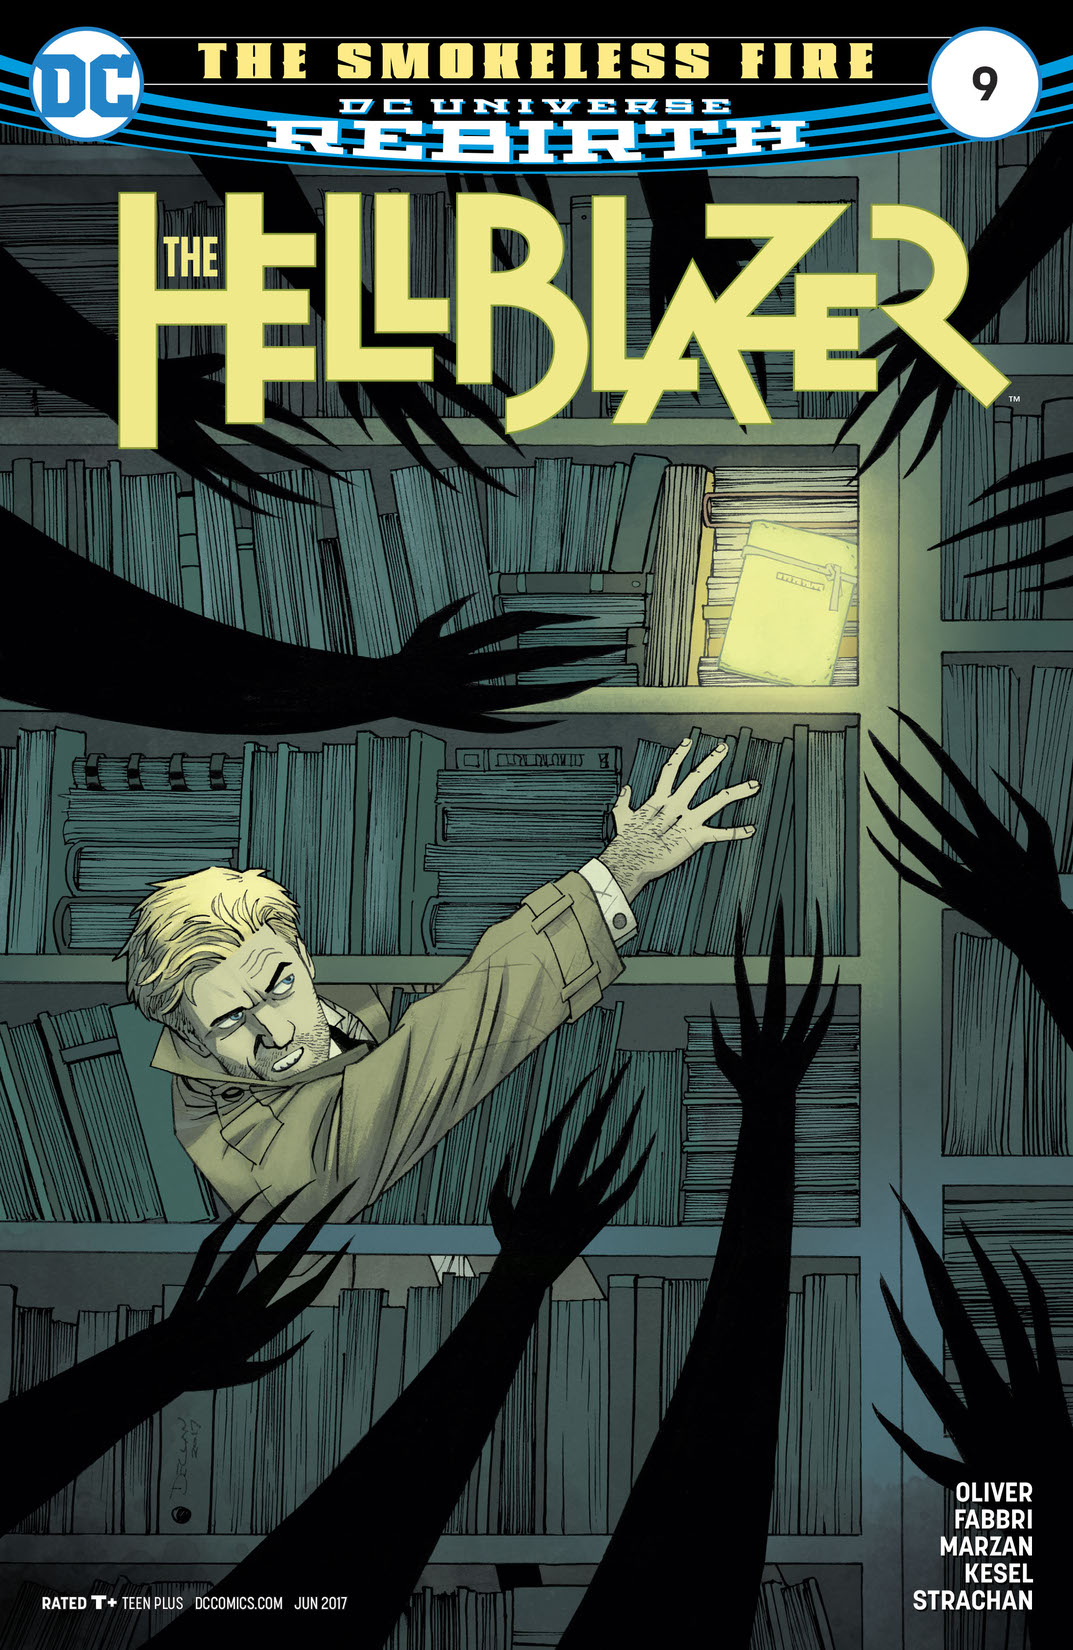 The Hellblazer #9 preview images